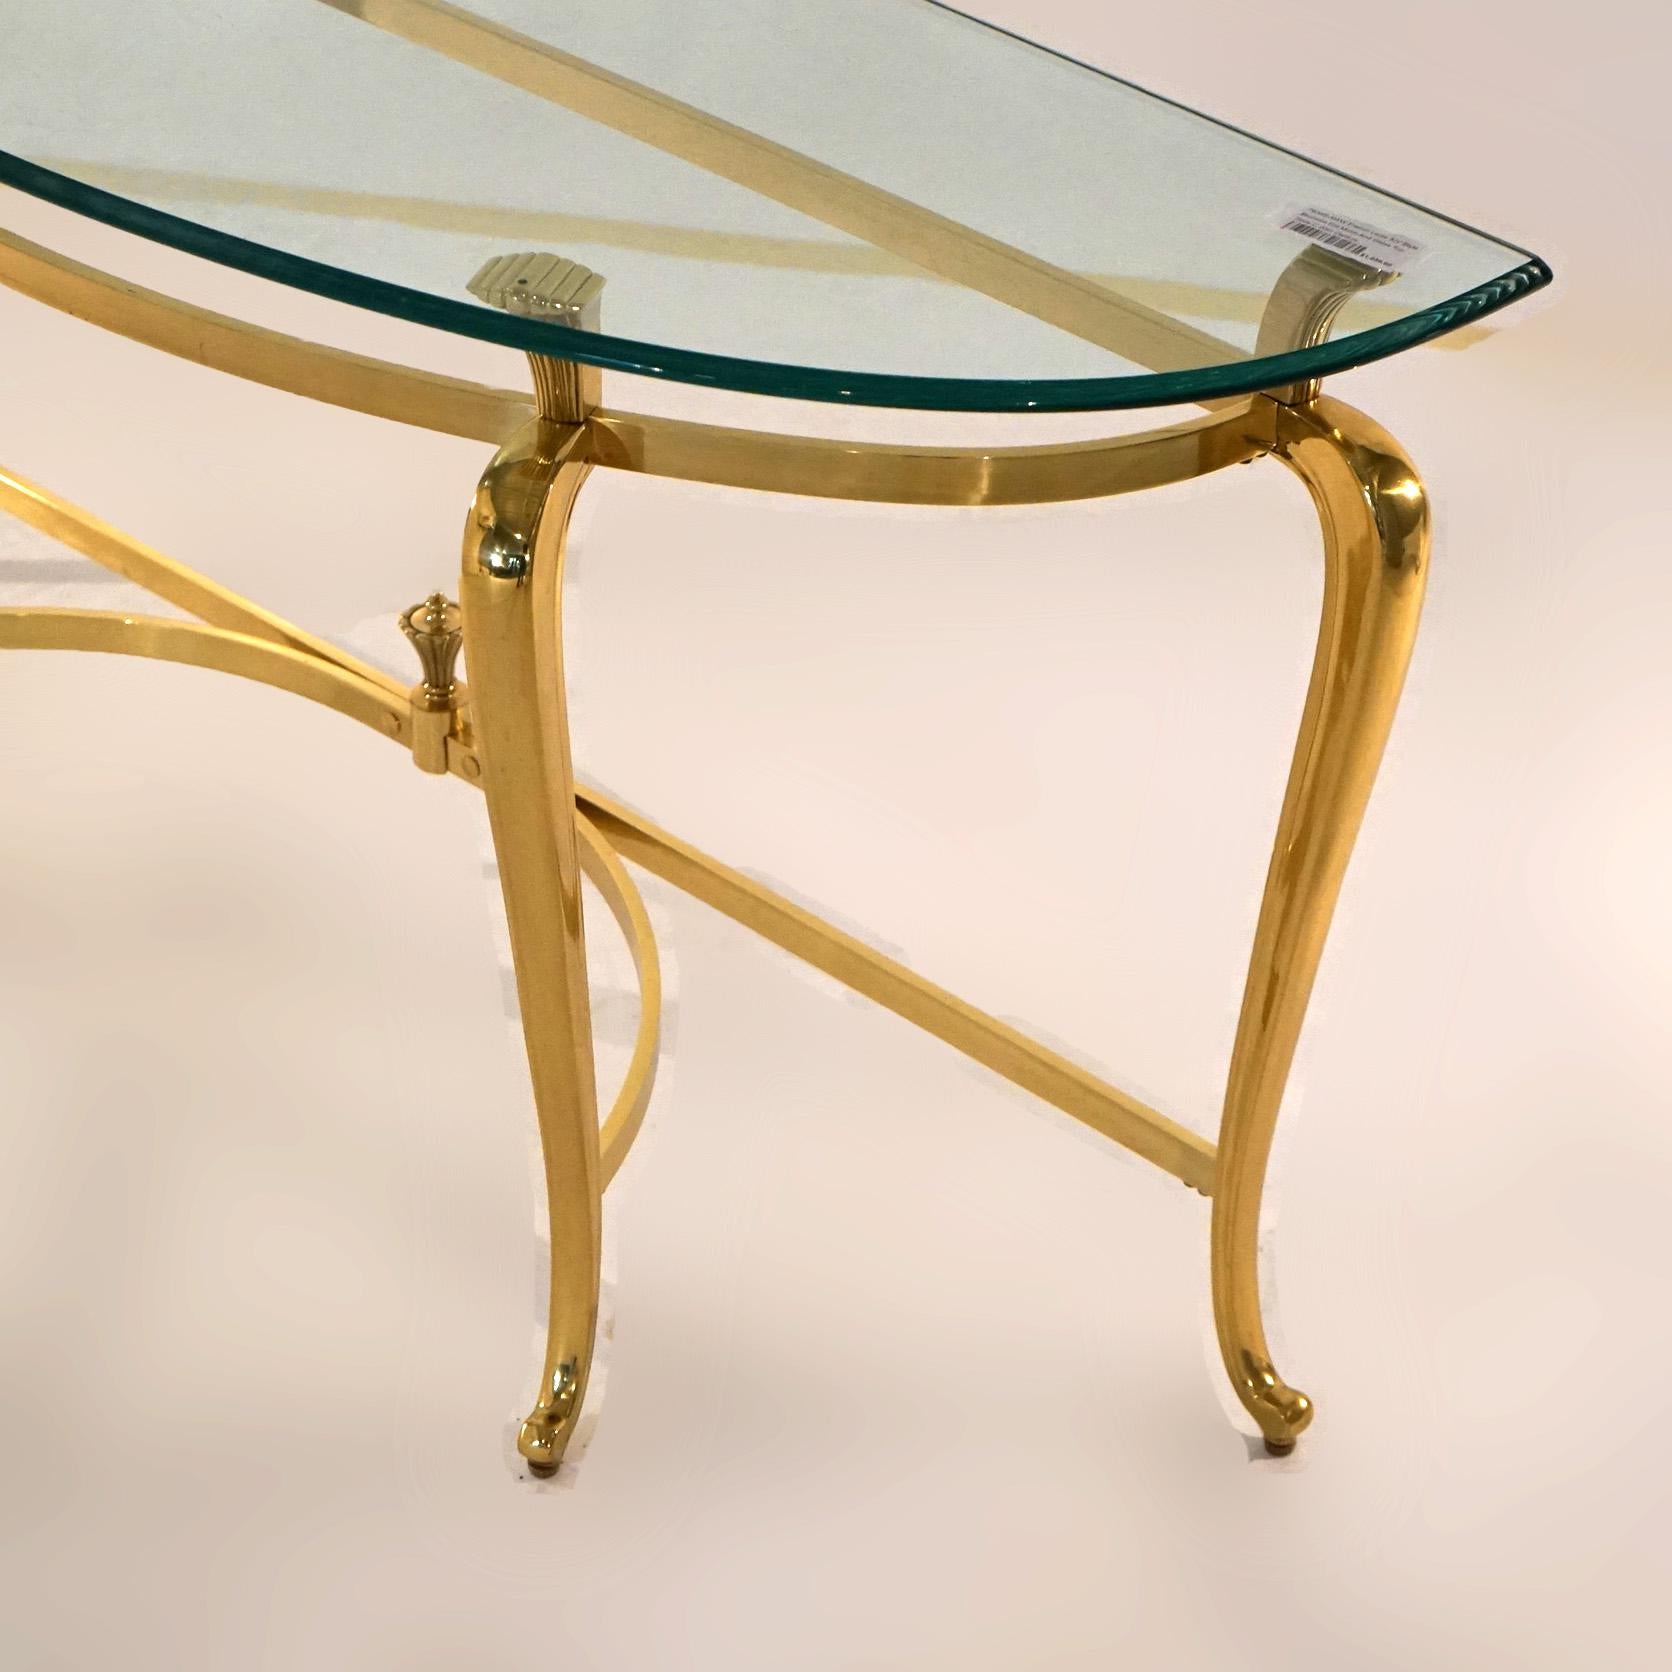 French Louis XIV Style Bronzed Gilt Metal Glass Top Console Table 20th C For Sale 4